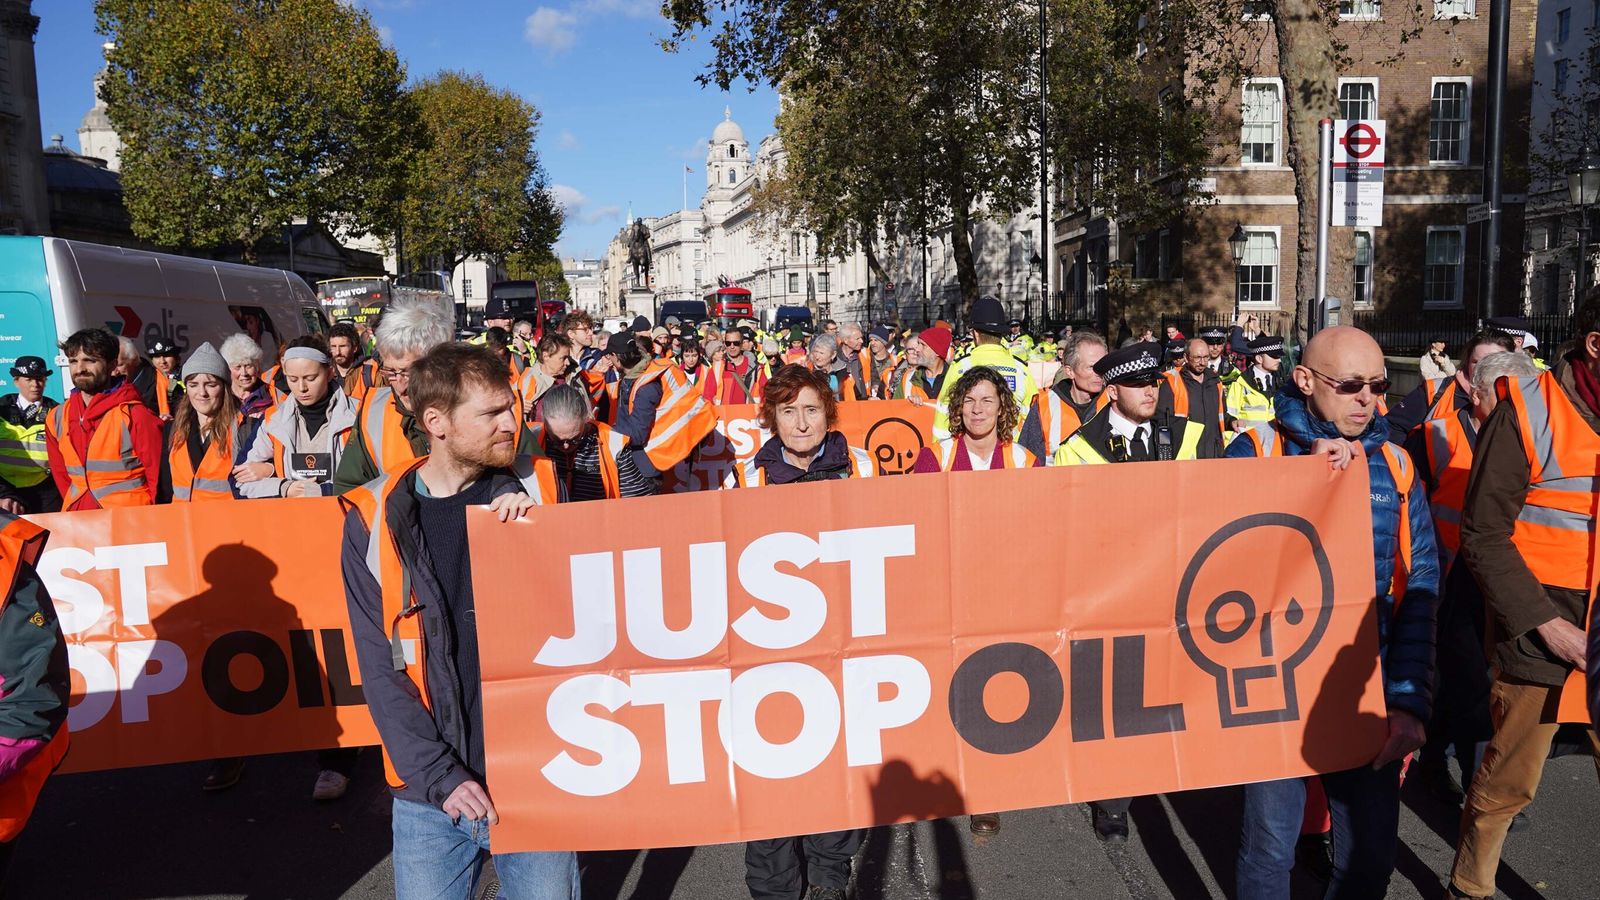 Just Stop Oil activists charged after demonstrations in London | UK News